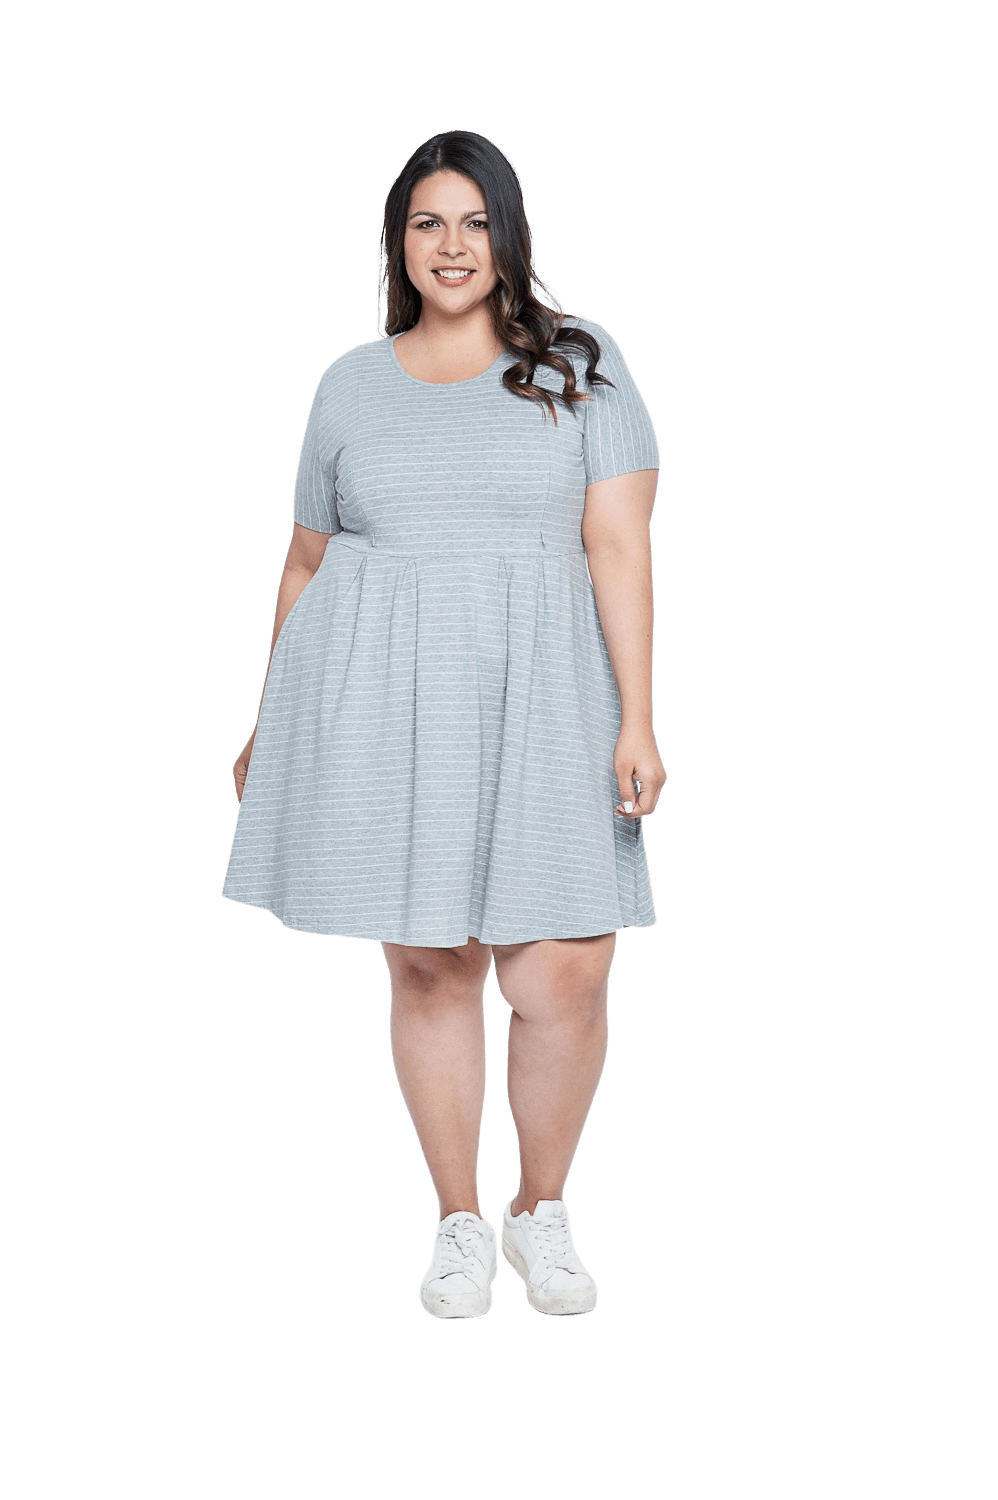 Curvy model facing camera wearing grey with white pin striped, knee length dress, featuring rounded neckline, fitted bodice, pleated A-line skirt and pockets. Kaitlyn available in sizes 6-26